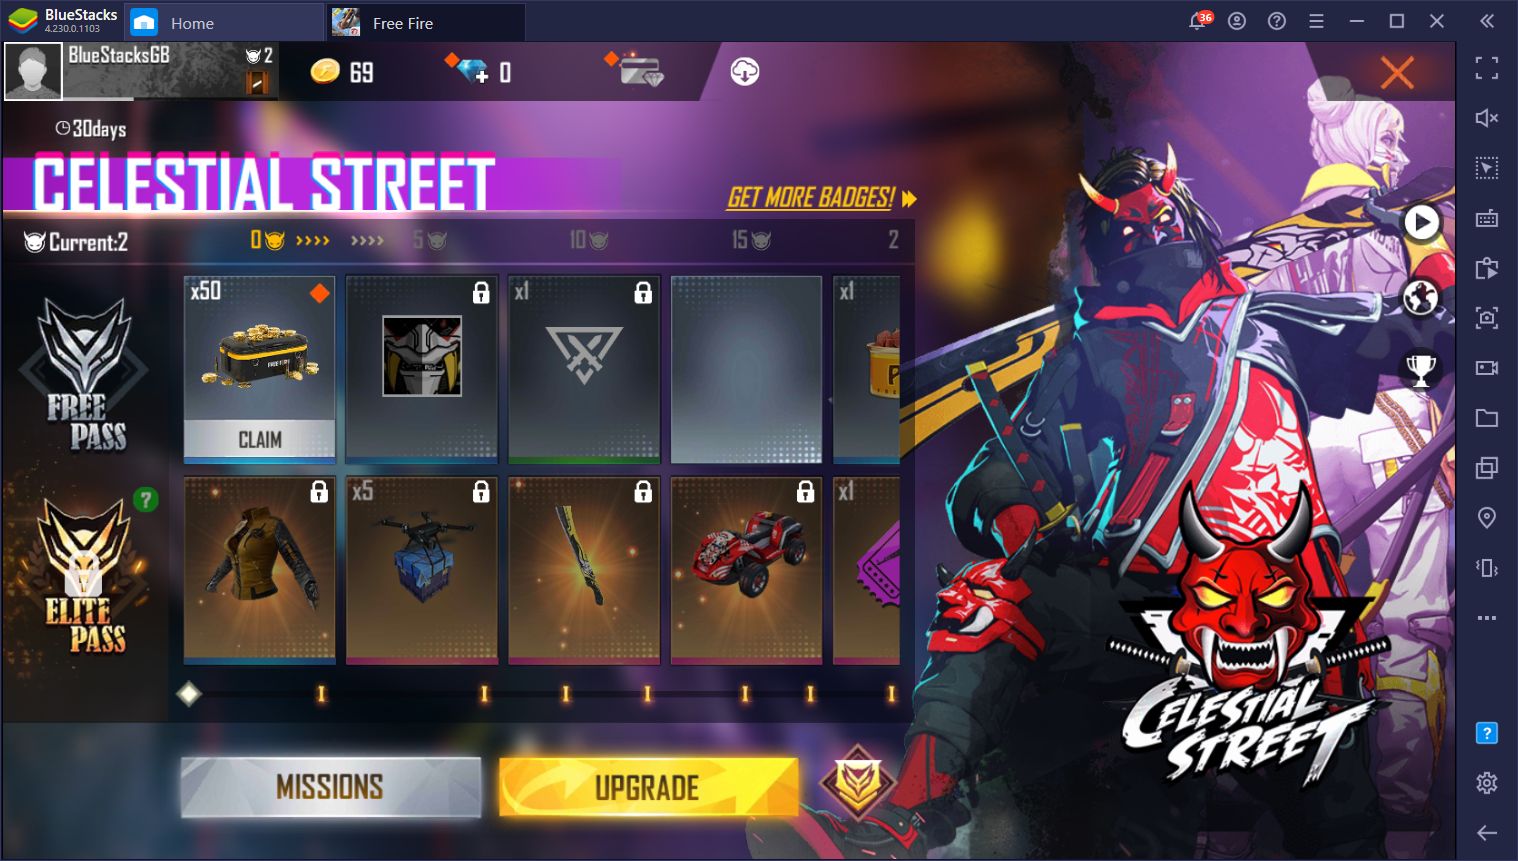 New Free Fire ‘Celestial Street’ Elite Pass - New Missions, Rewards, and Awesome Outfits